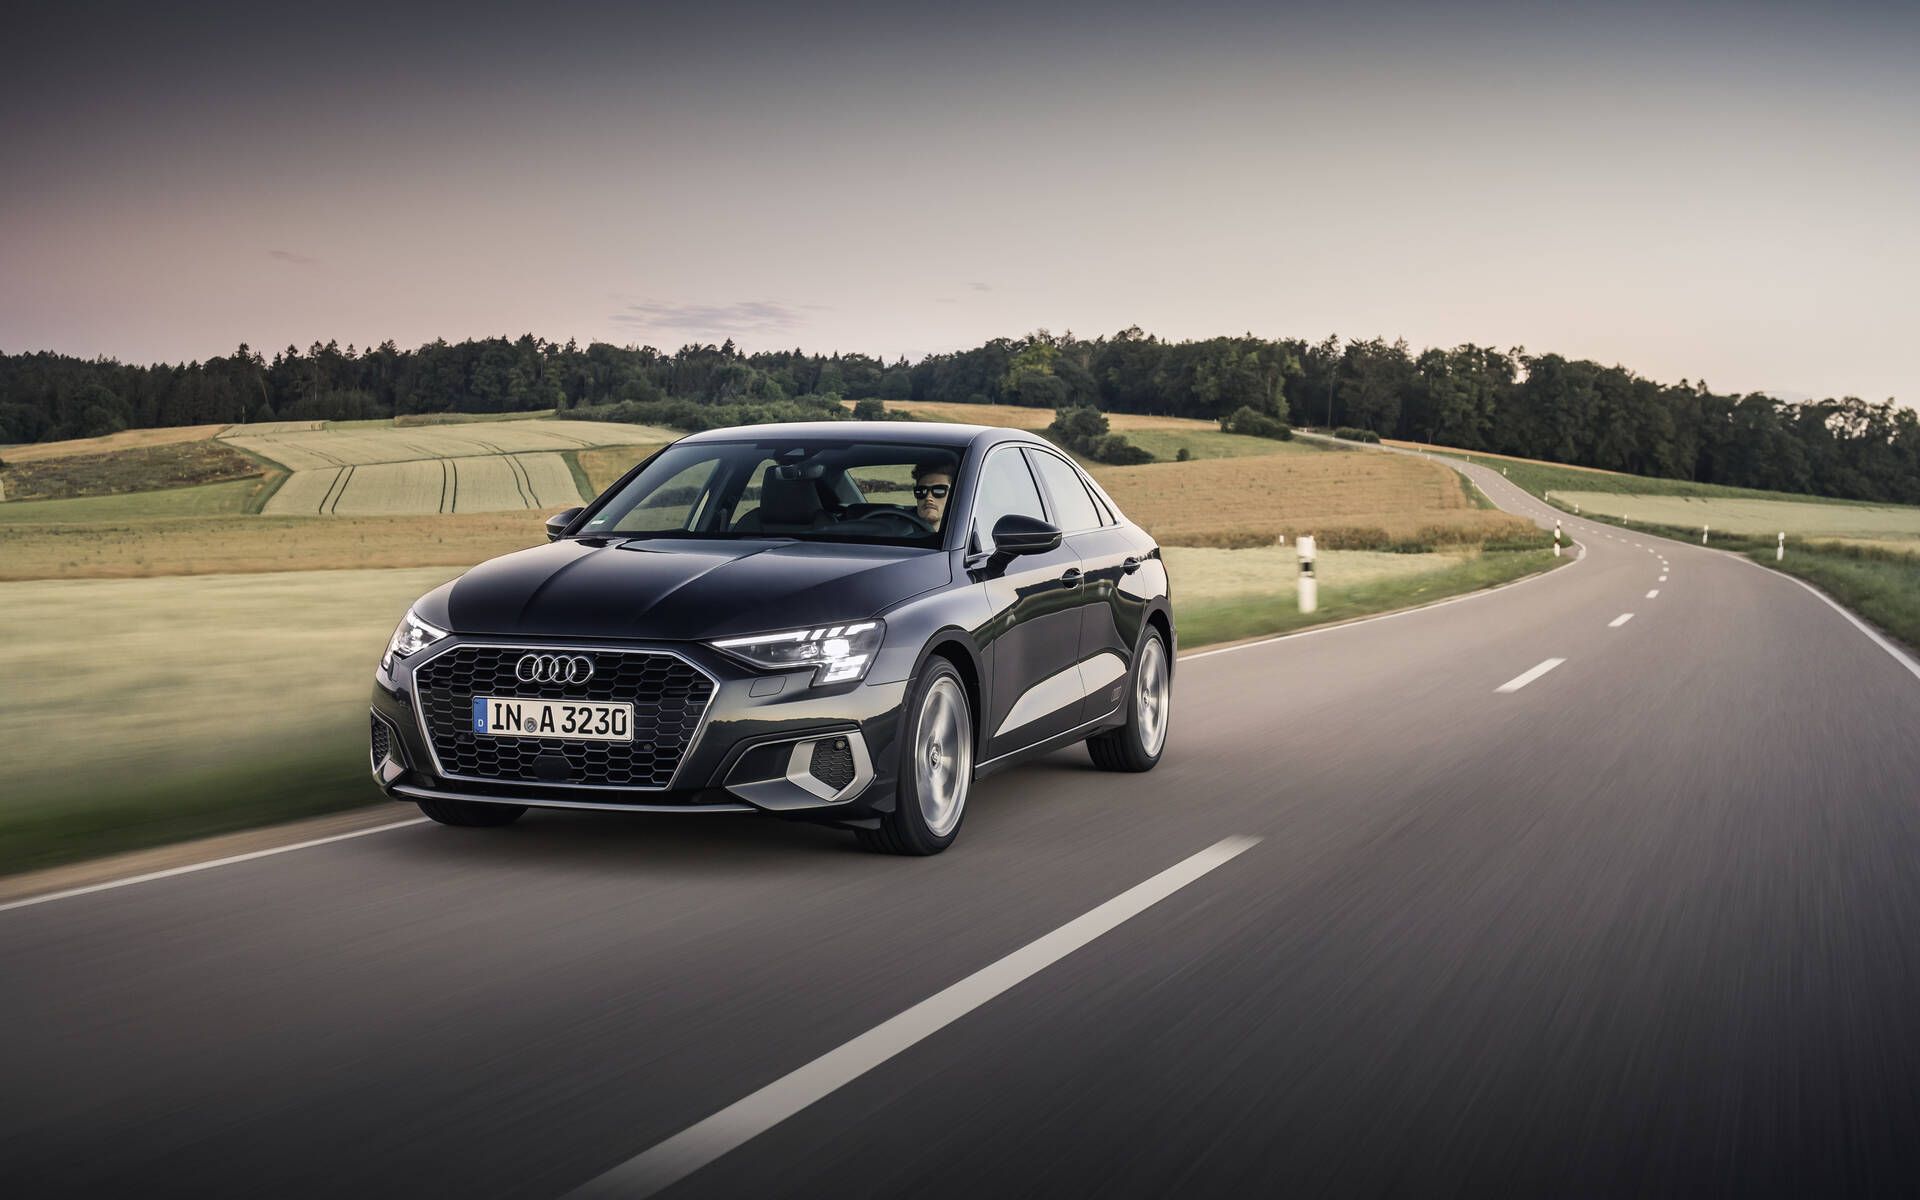 Fully Redesigned 2022 Audi A3 to Attract Customers - The Guide